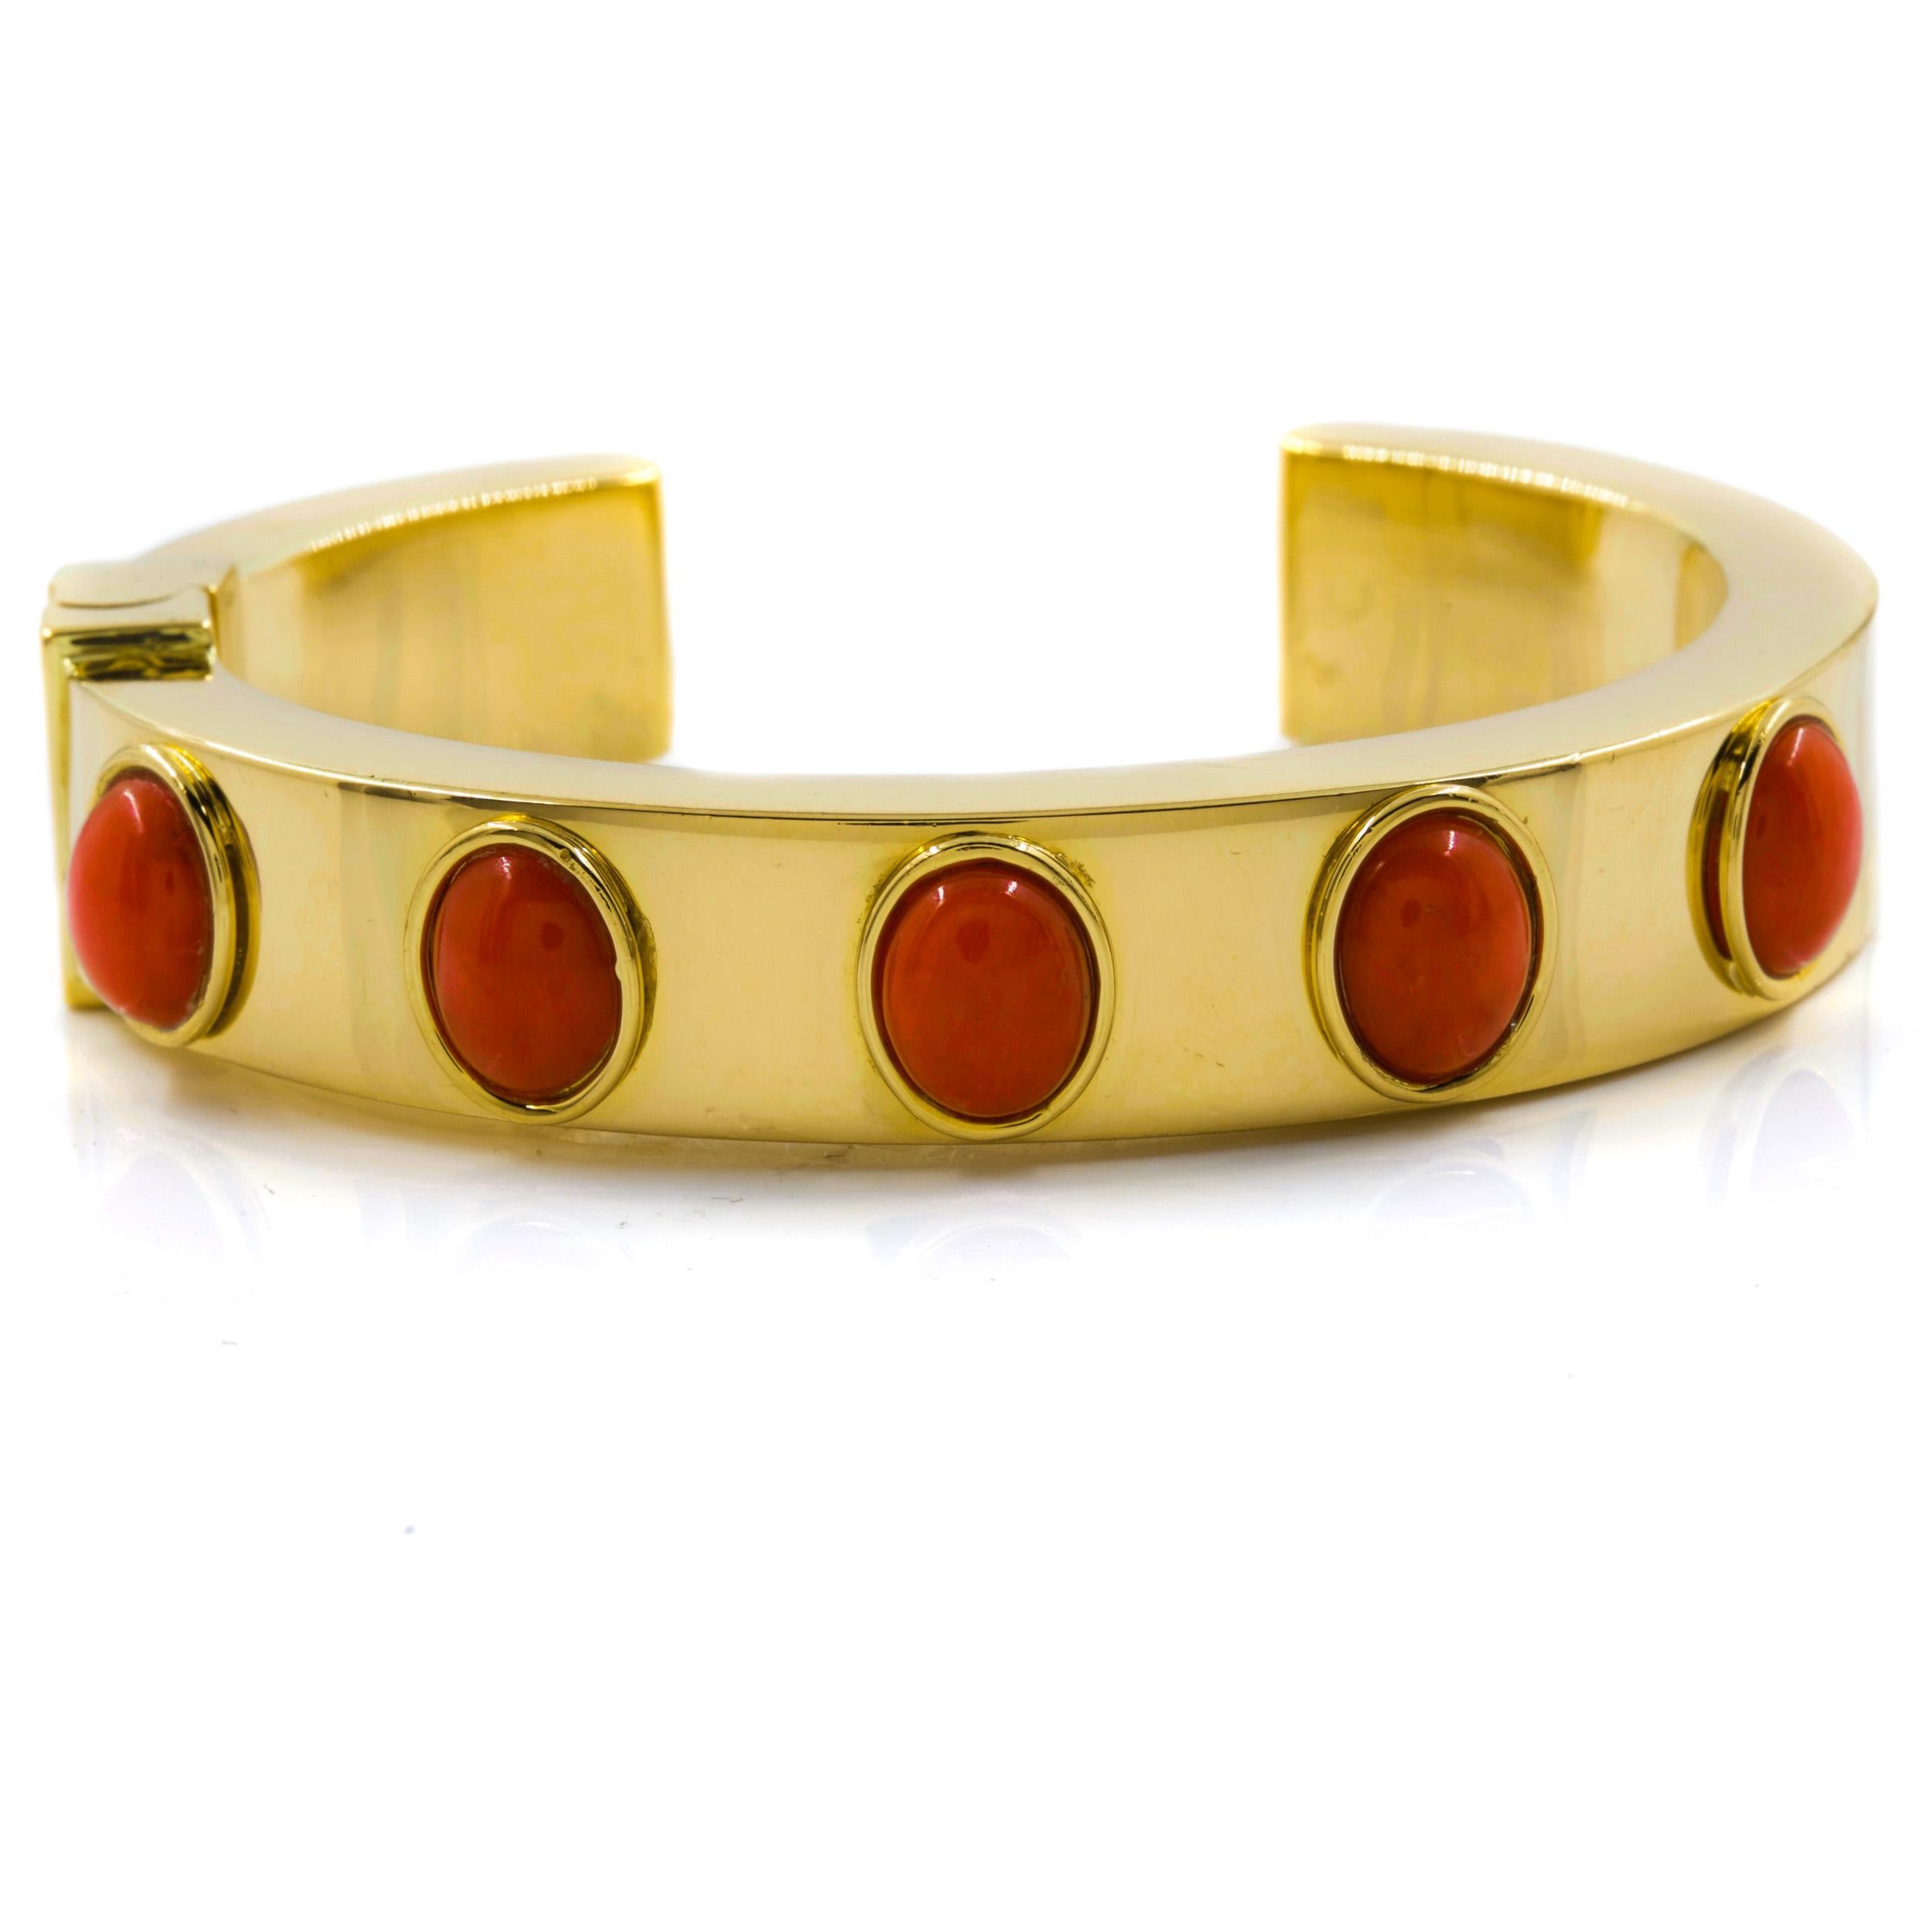 This incredibly fine and unusually heavy hinged cuff bracelet is carefully crafted entirely of 18k yellow gold, the top set with five red high-polish cabochon stones within raised rims. The surface is high-polish and austere, the end of the cuff